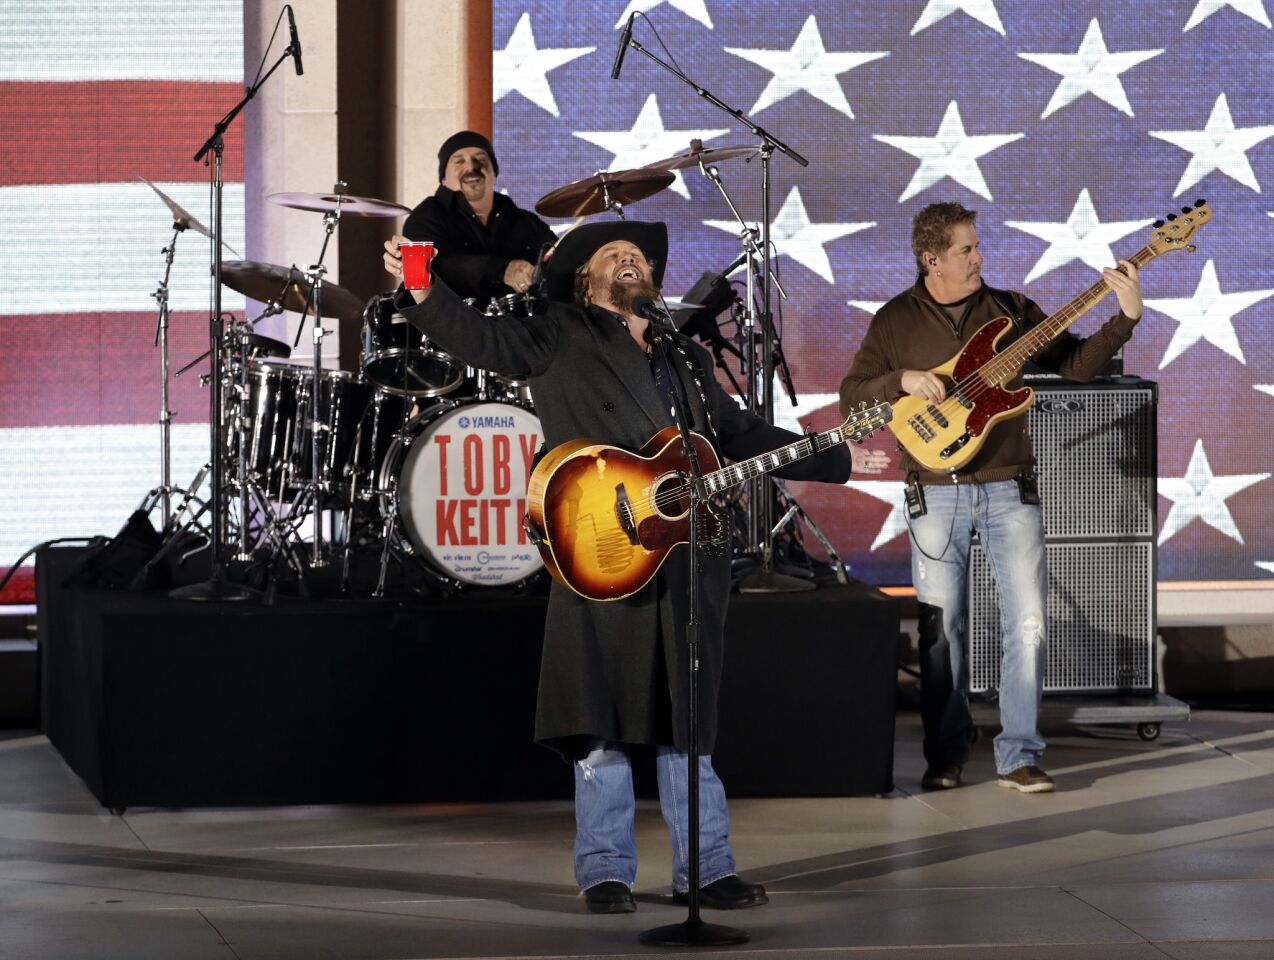 Toby Keith performs.